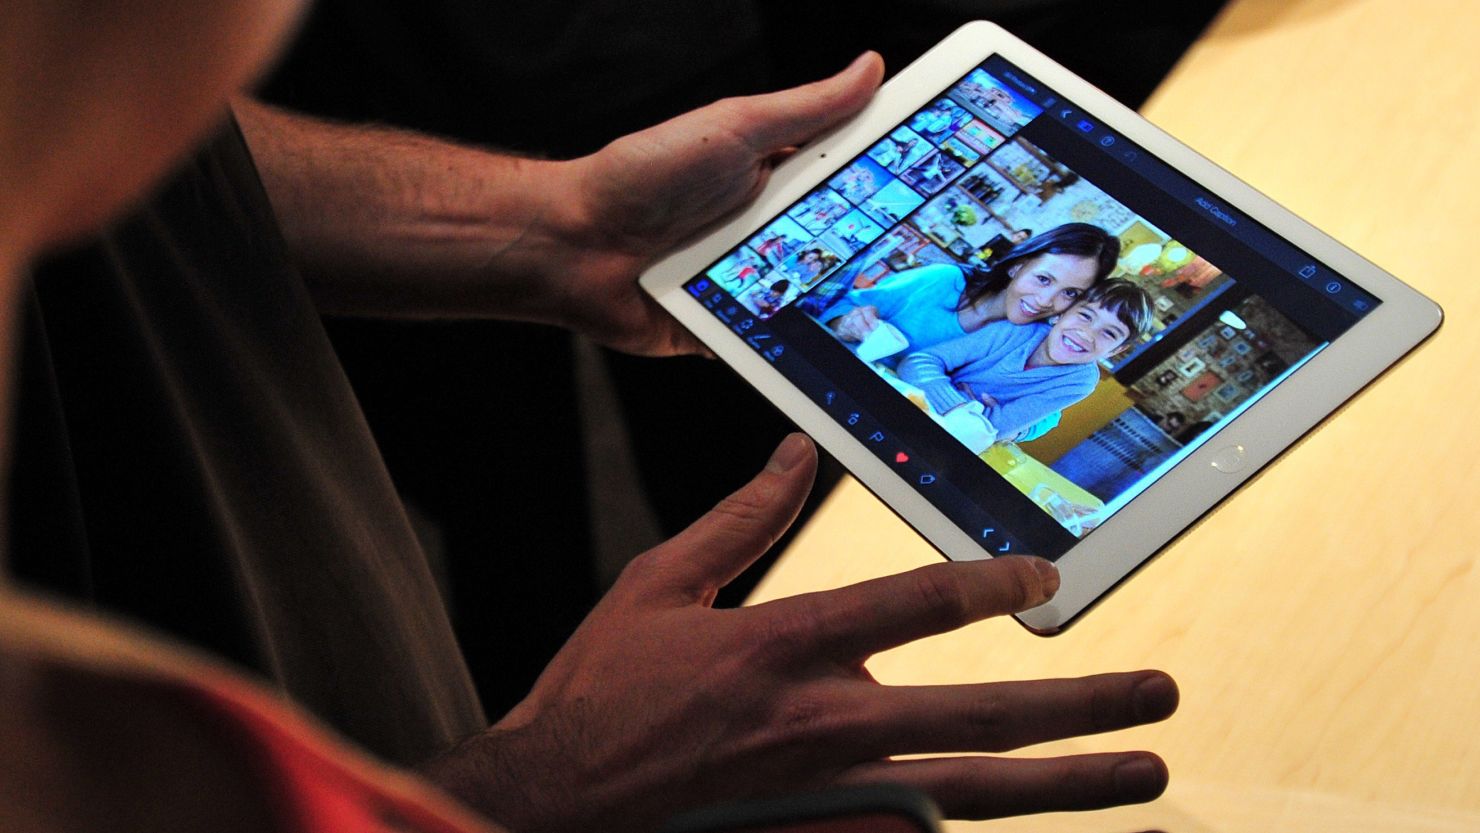 A report says the next iPad will have a 12.9-inch screen, much bigger than the current iPad's 9.7.